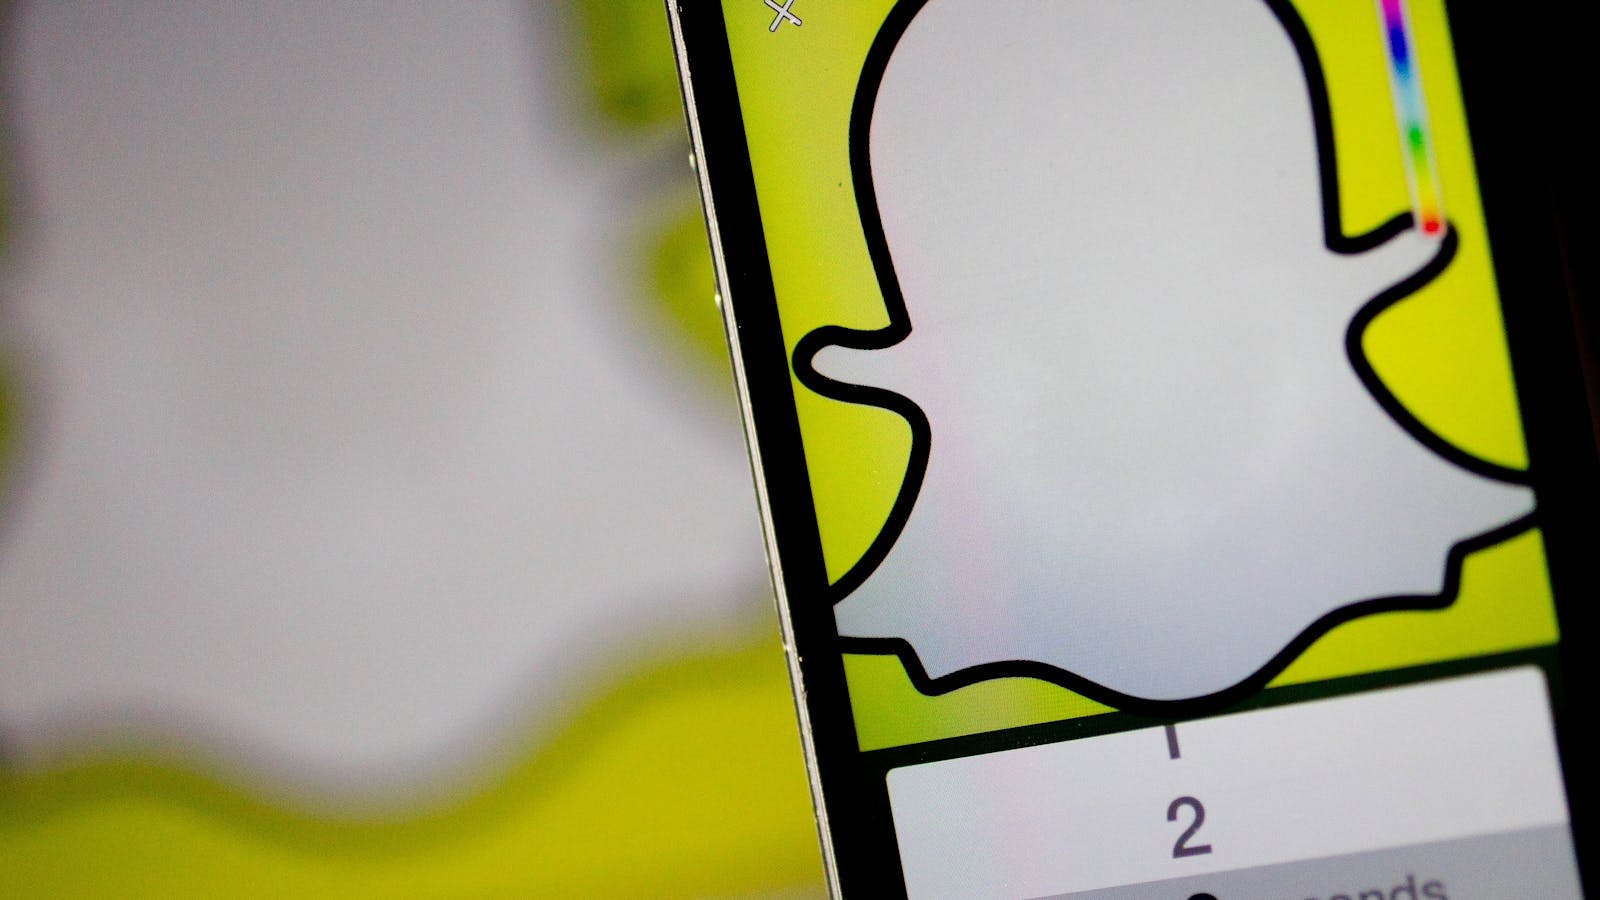 The Snapchat app. Photo by Bloomberg